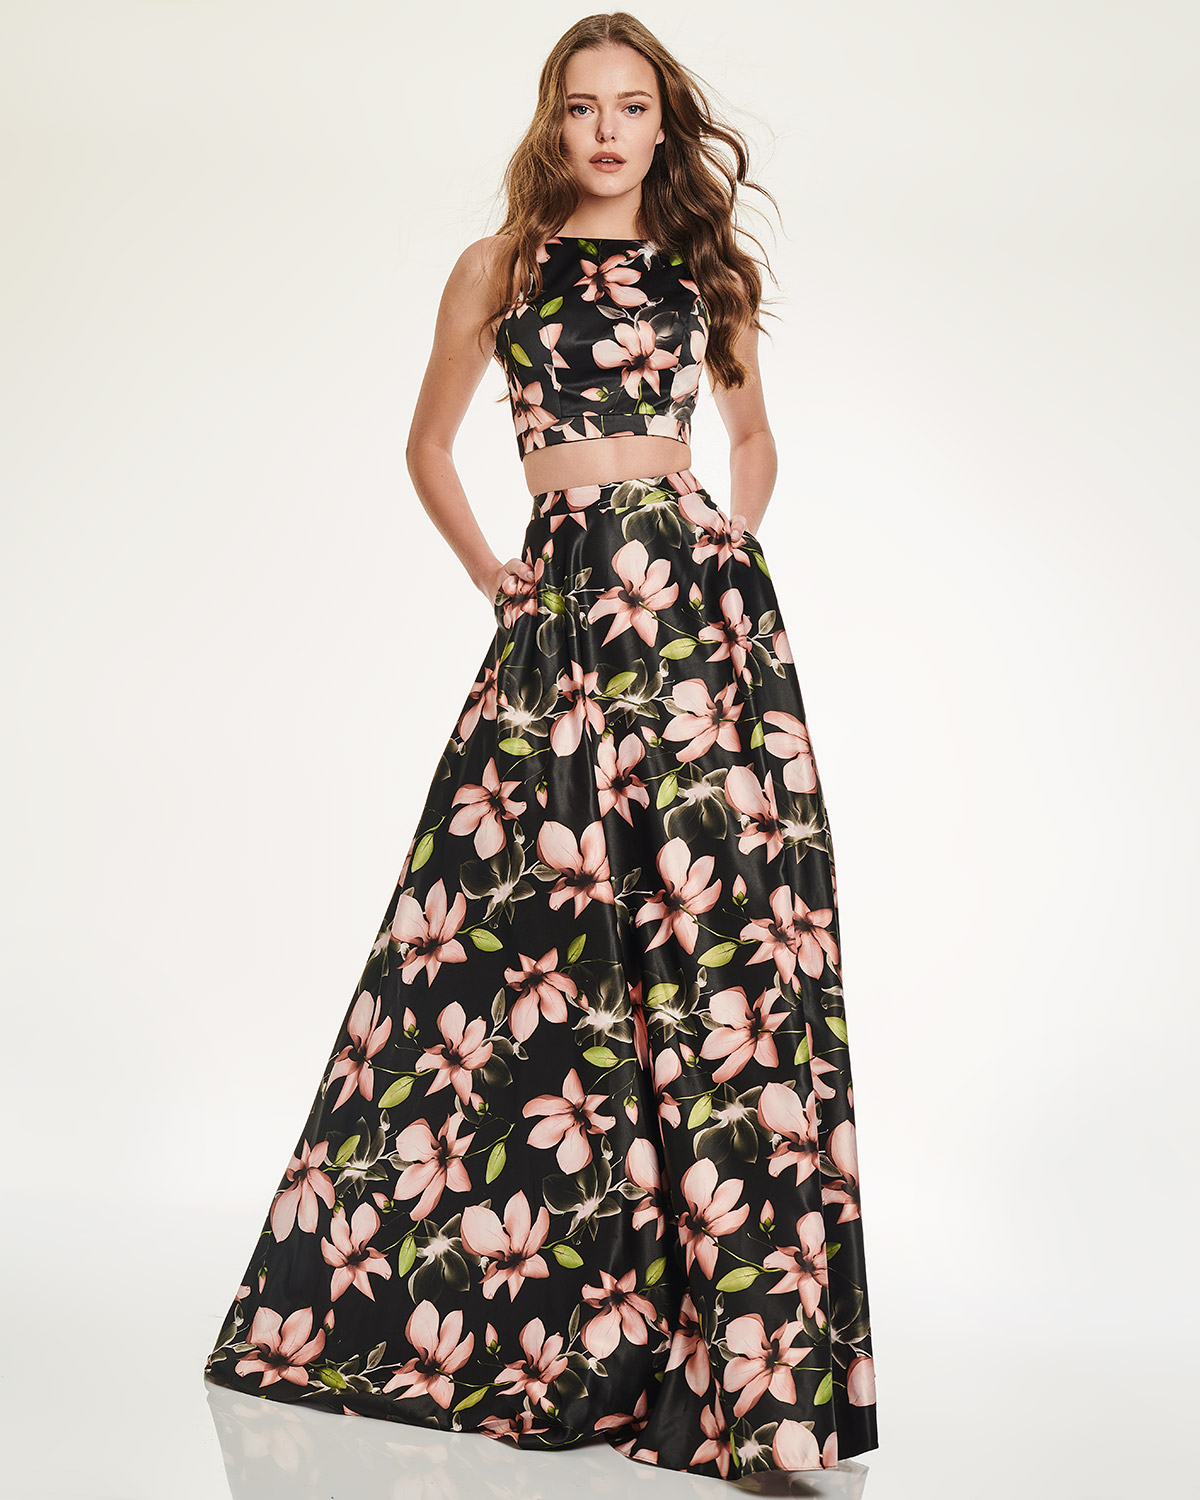 Cocktail Dresses / Long floral skirt with top